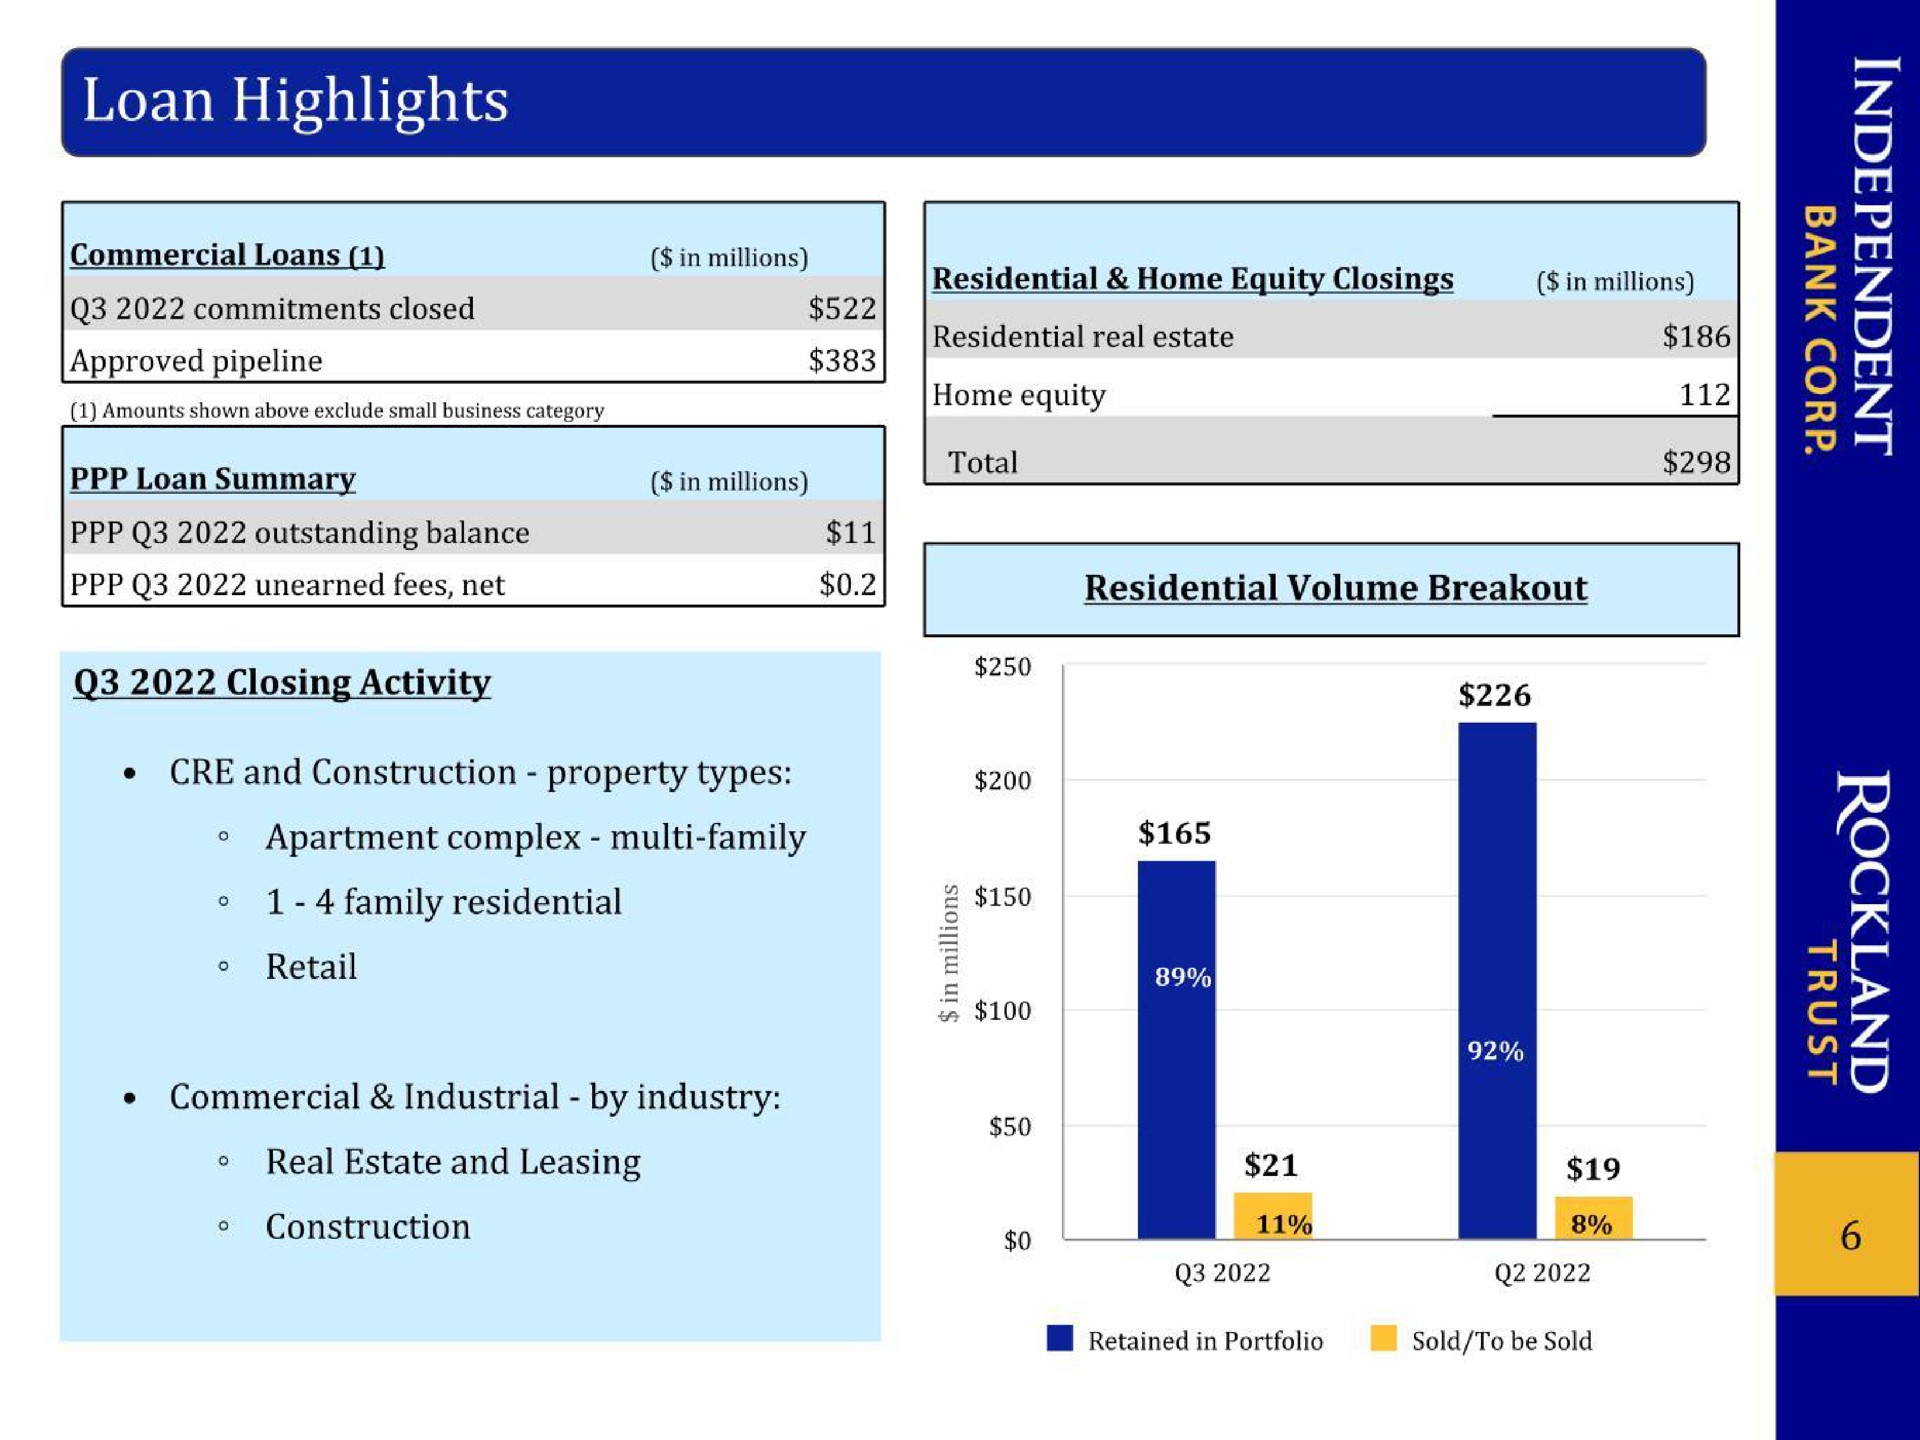 unearned fees net outstanding balance loan highlights go commercial industrial by industry and construction property types apartment complex family residential volume breakout closing activity family residential real estate and leasing construction an | Independent Bank Corp